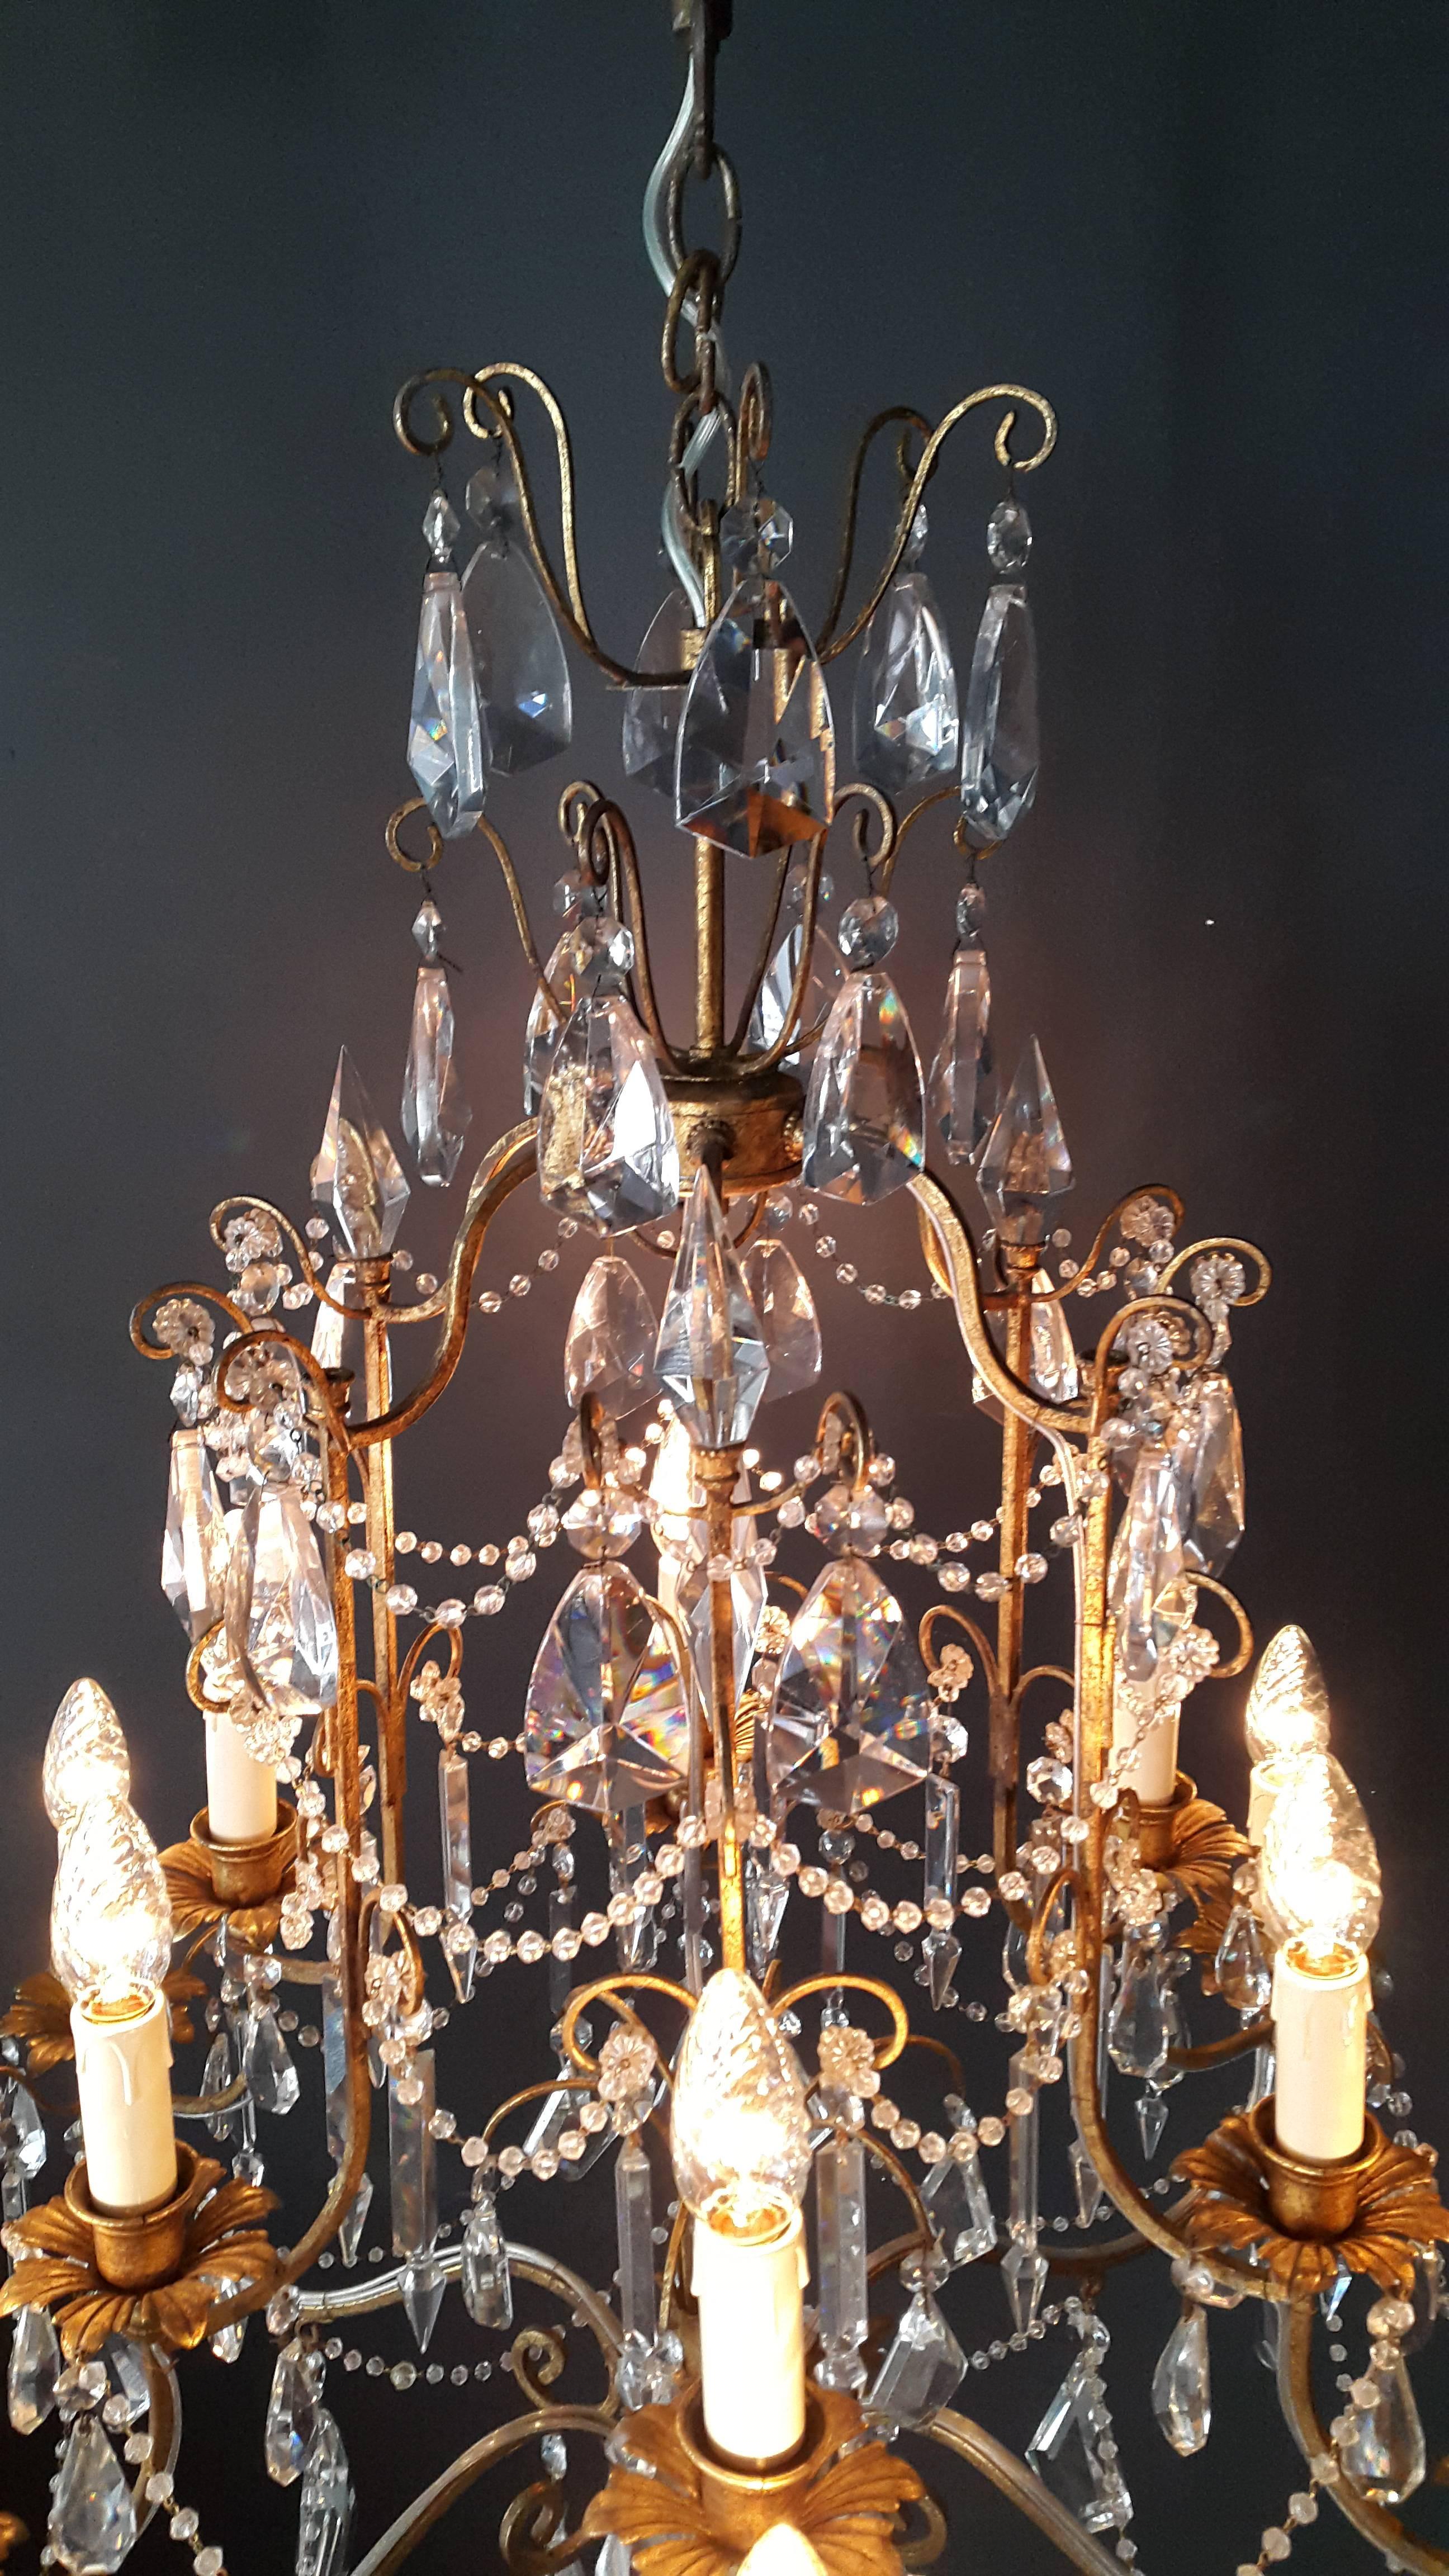 Product information

Total height: 110cm height without chain: 93cm diameter: 70cm weight (approximately): 13kg

Number of lights: 12 light bulb sockets: E14.



Total length variable.

Chandelier works Worldwide.